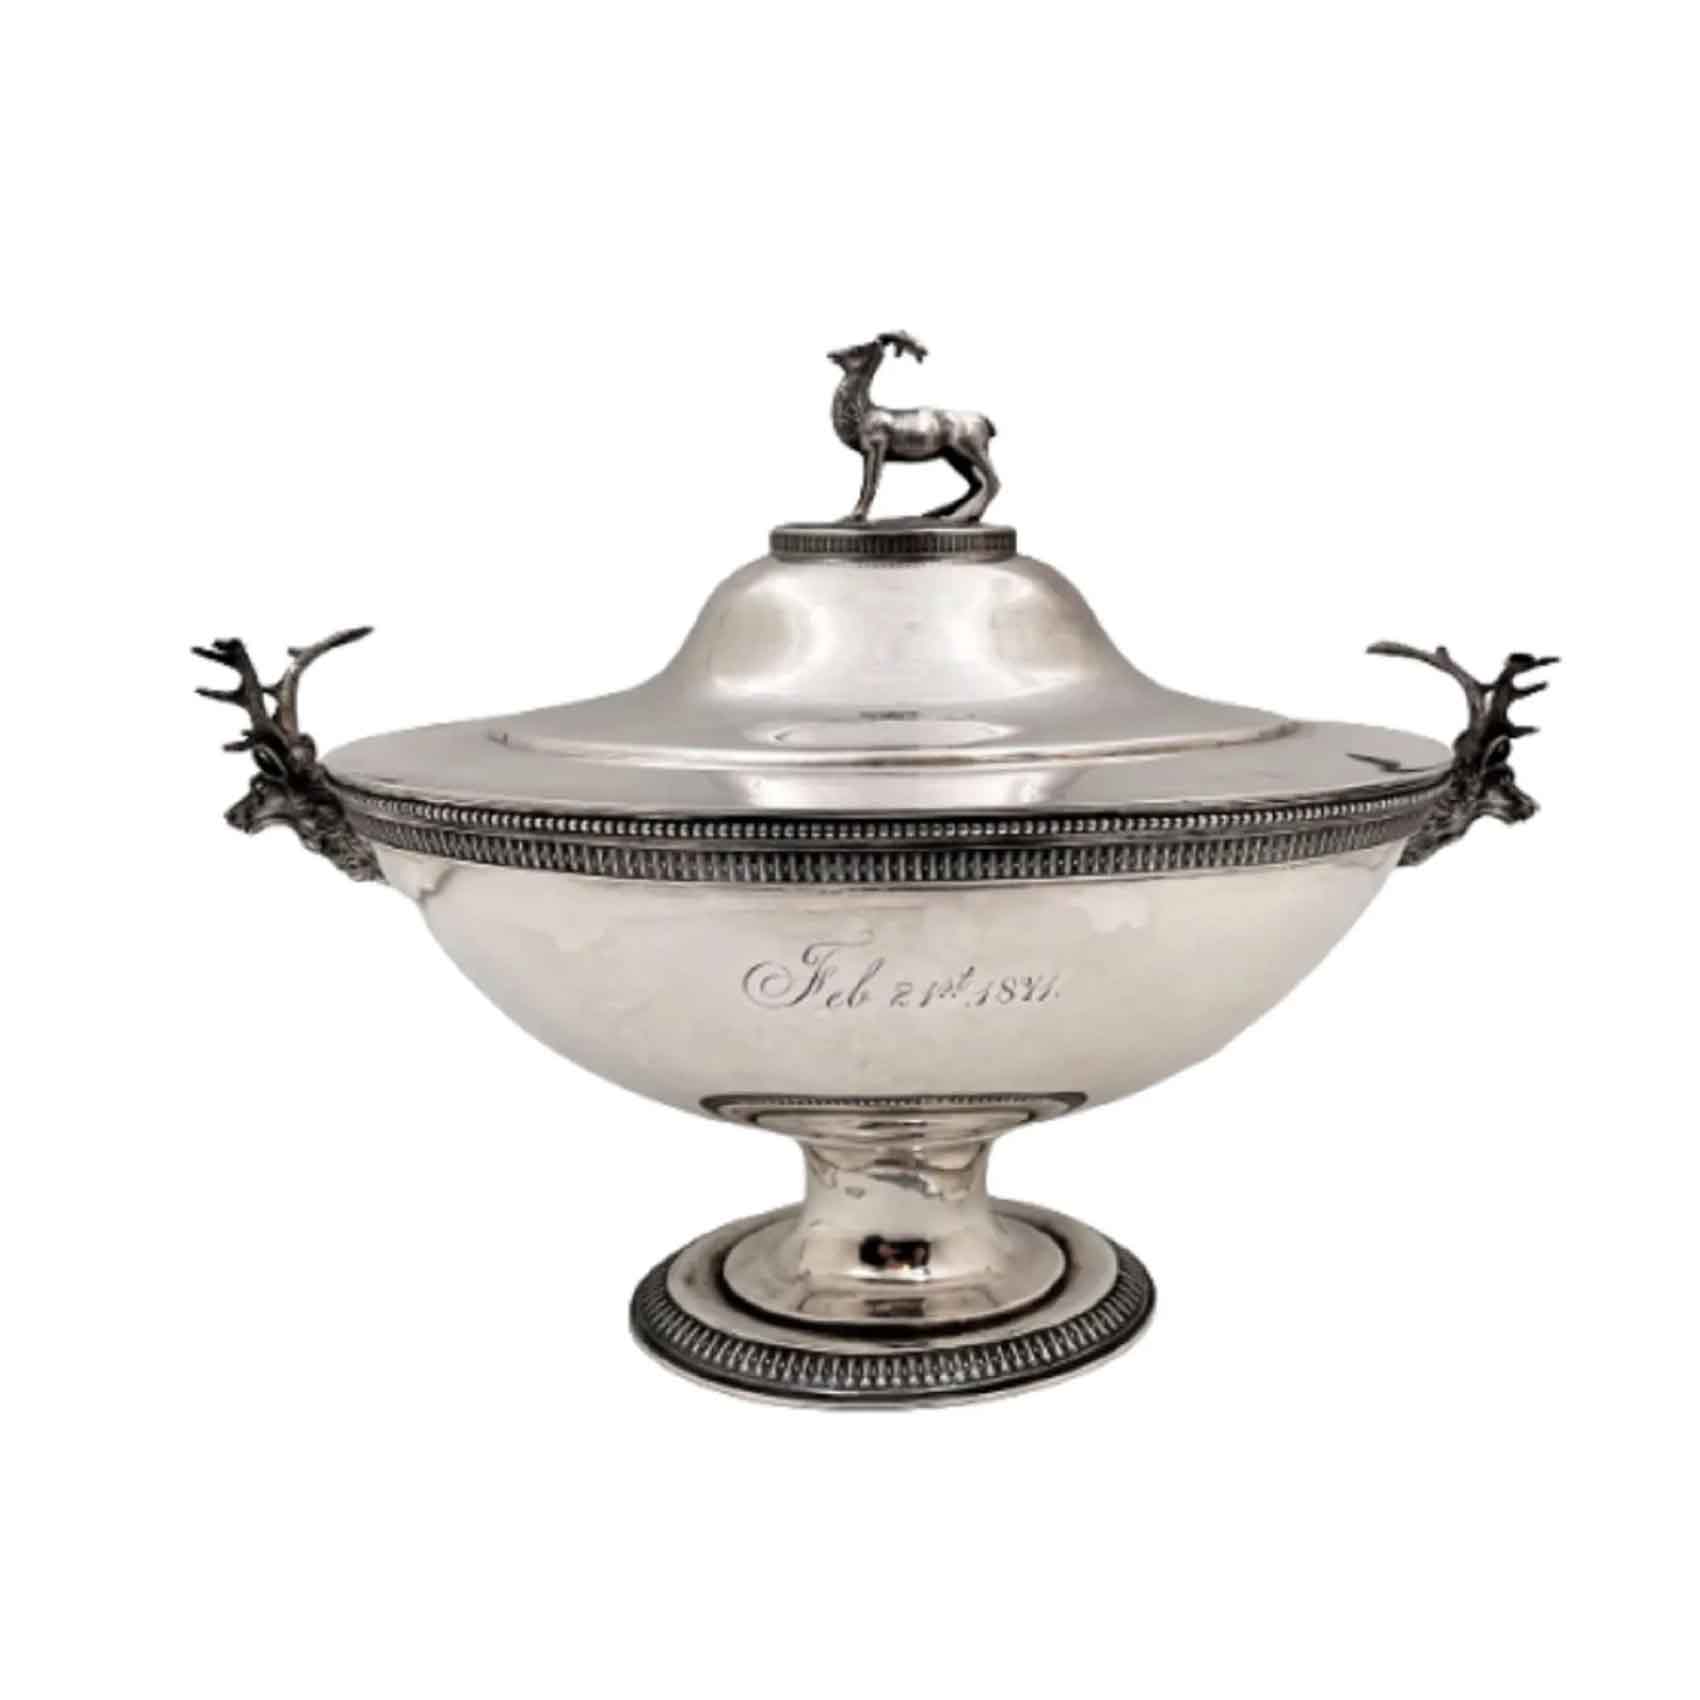 Ford & Tupper 1871 Sterling Silver Stag Tureen Bowl, estimated at $2,800-$3,800 at SJ Auctioneers.